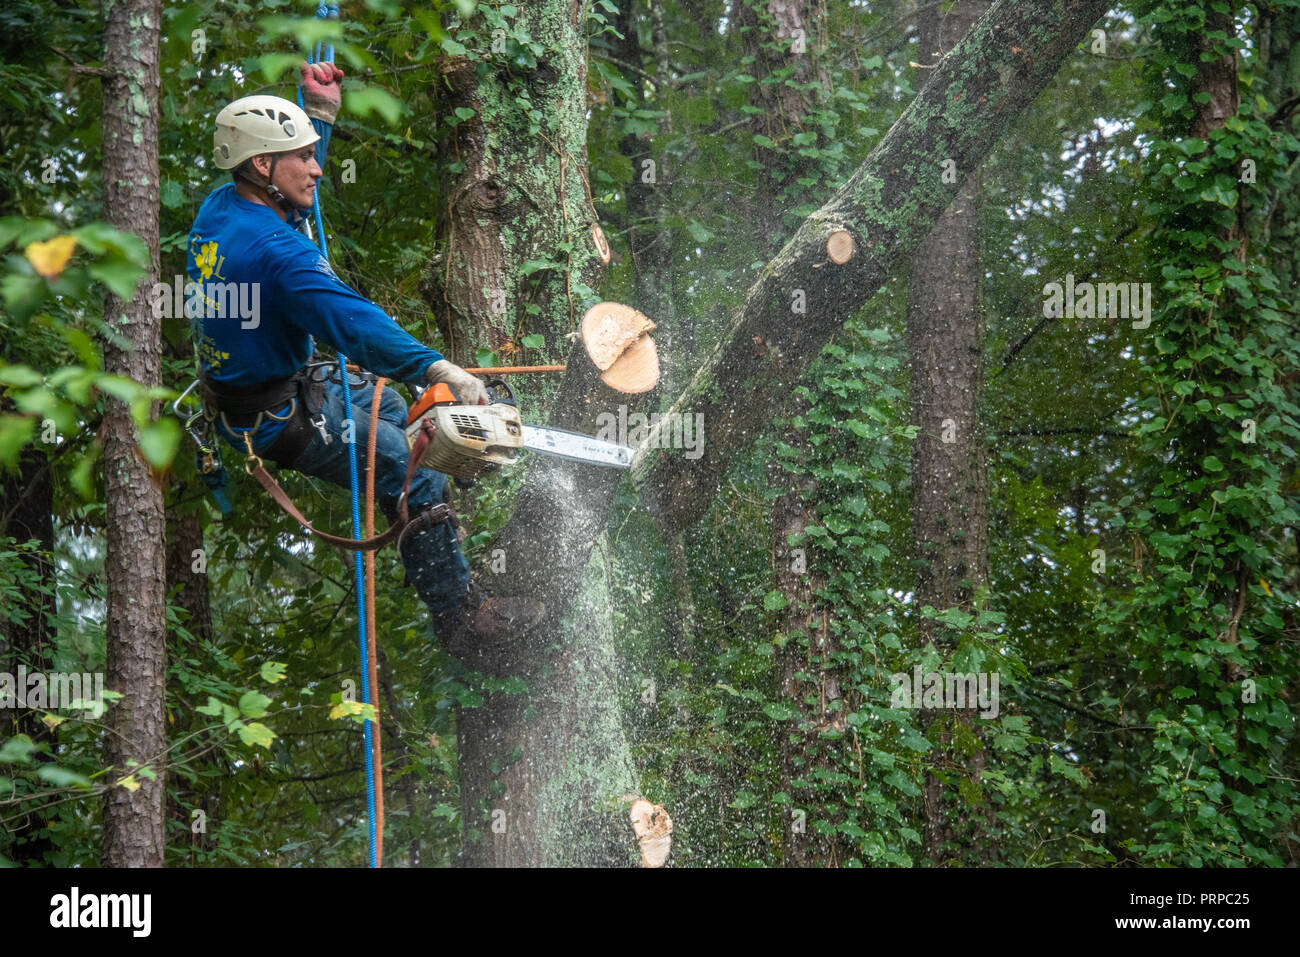 Tree service climber bringing down a large oak tree in sections at a home in Metro Atlanta, Georgia. (USA) Stock Photo